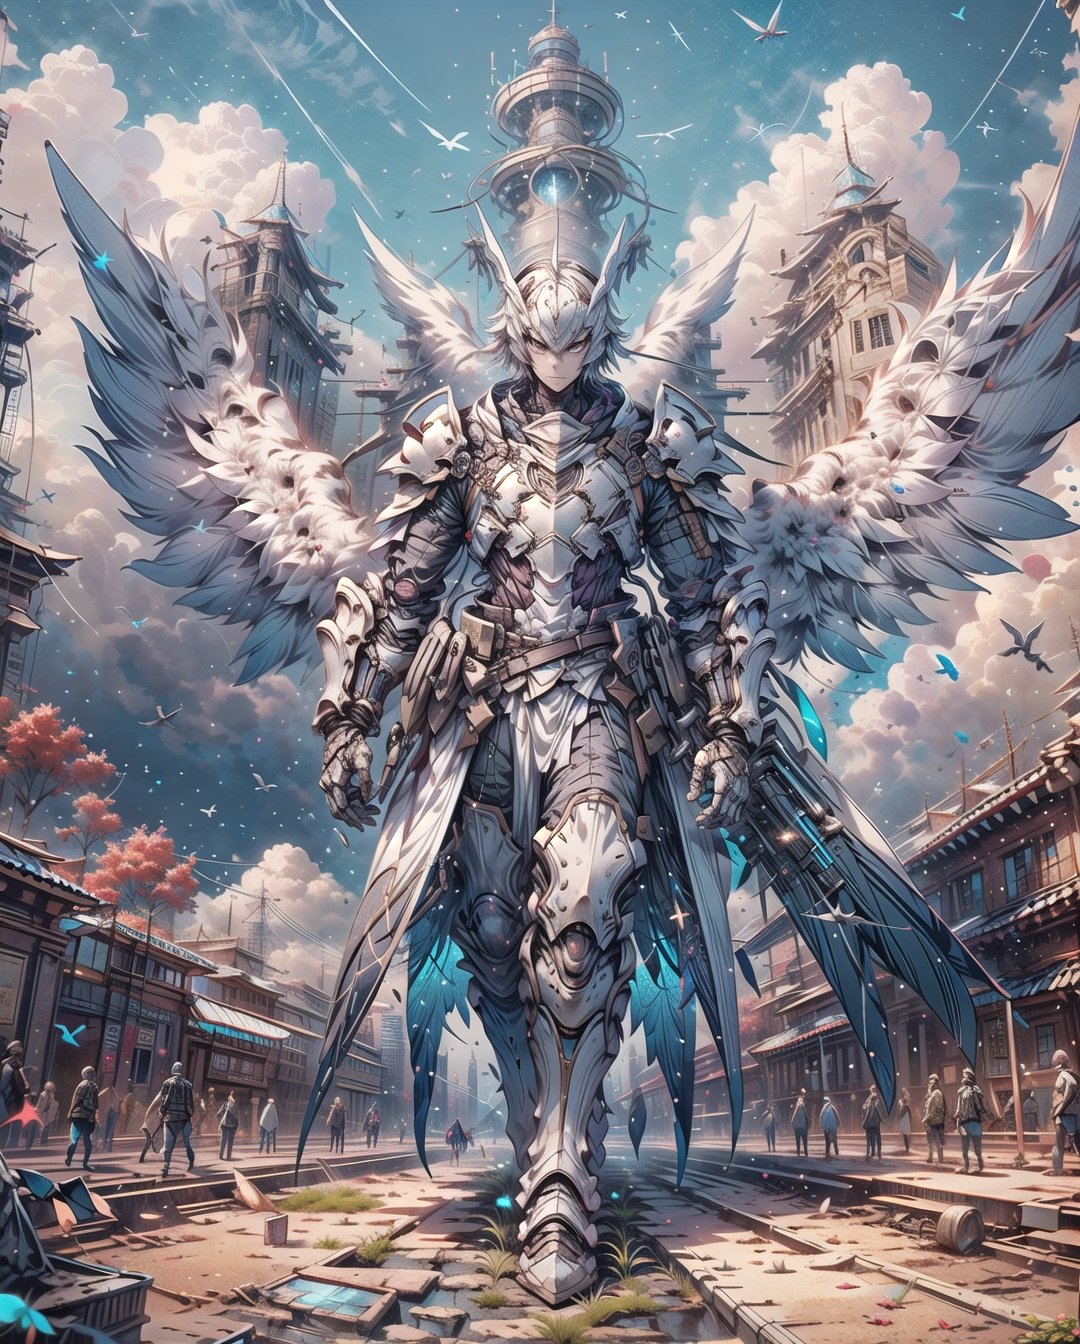 Medieval equipment,  left man and right woman, knights (ensemble stars!),armor, wings, sky,white armor, cloud, outdoors, angel wings, bird,blend, medium shot, bokeh,outdoors, open grassland, symmetrical composition, low-angle shooting, zoom in, the most beautiful image I have ever seen, wide angle , distant view, looking up, combat scene, action_pose